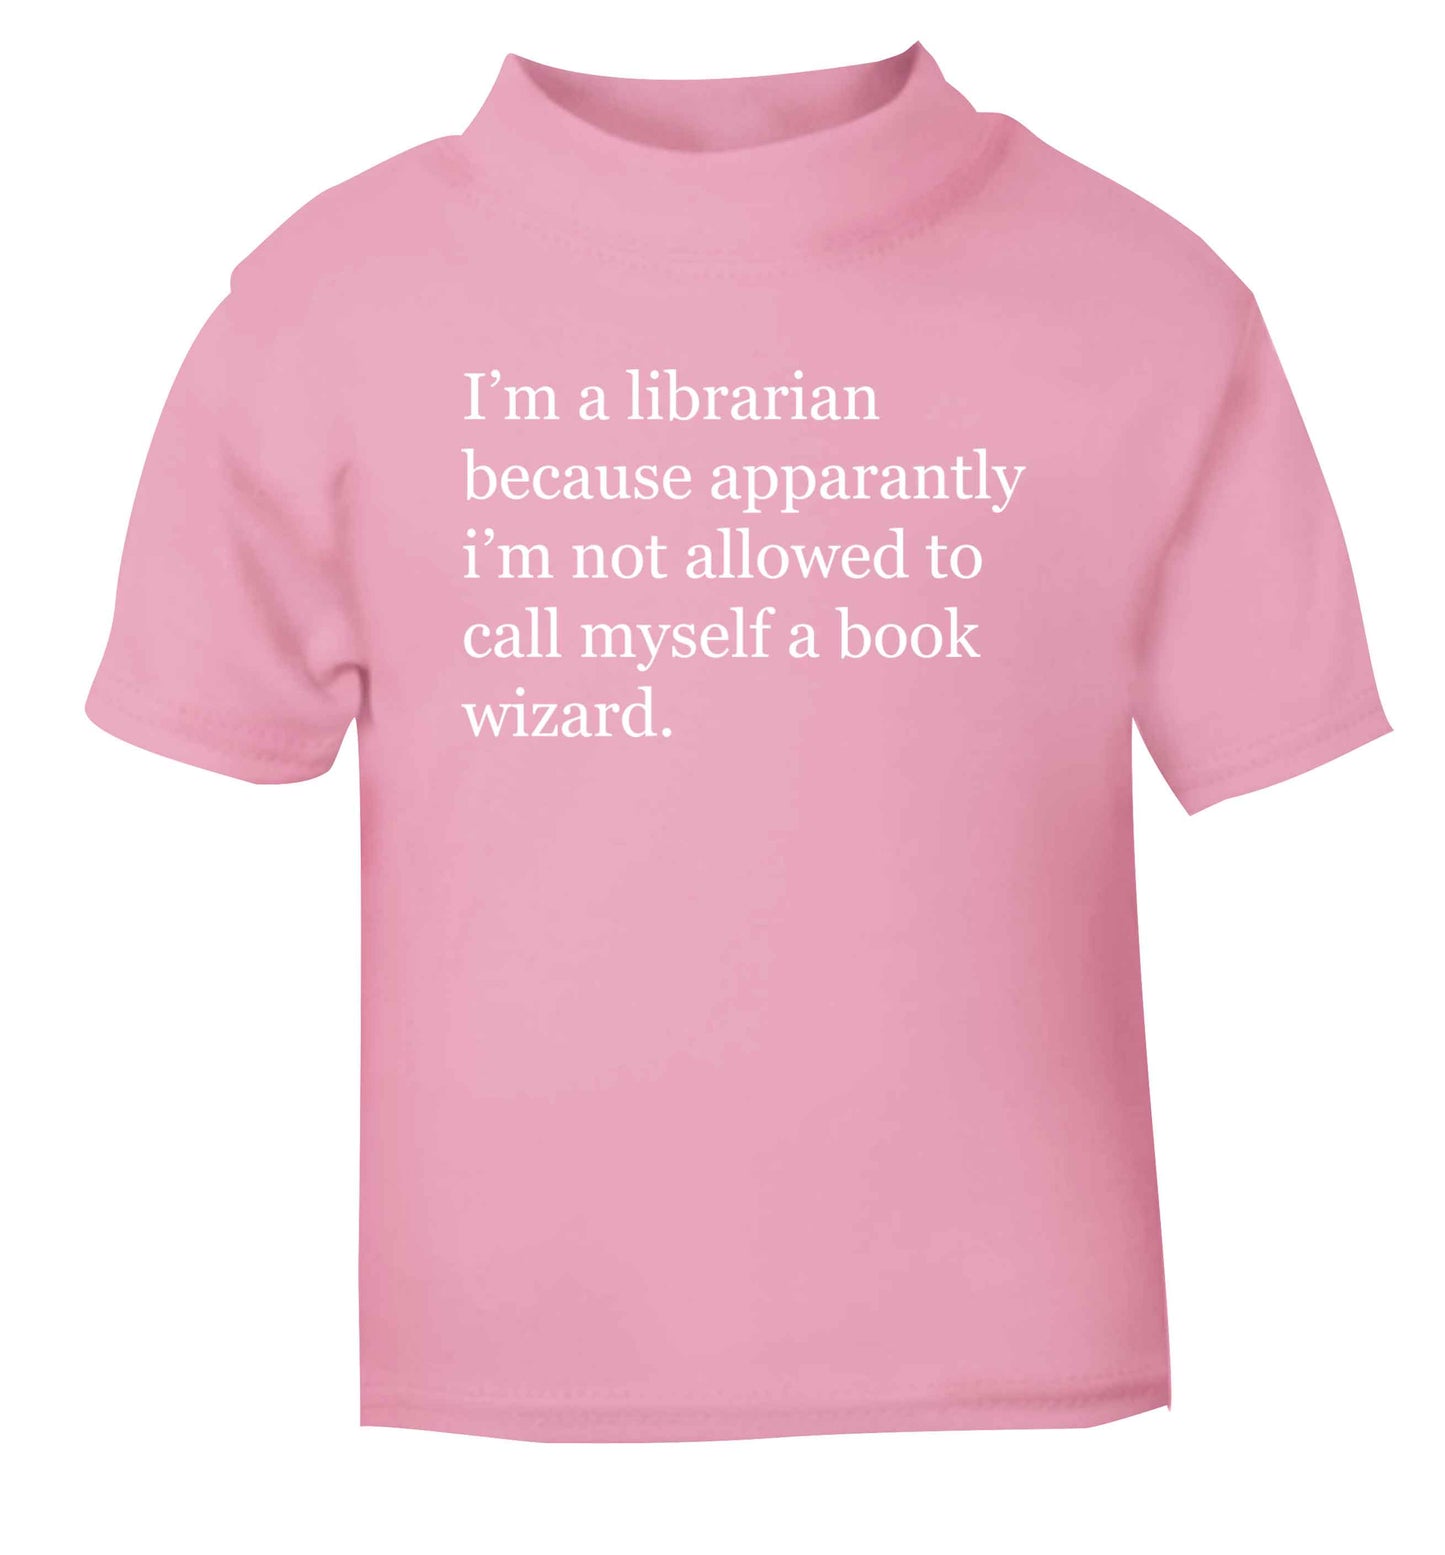 iÕm a librarian because apparantly iÕm not allowed to call myself a book wizard light pink Baby Toddler Tshirt 2 Years